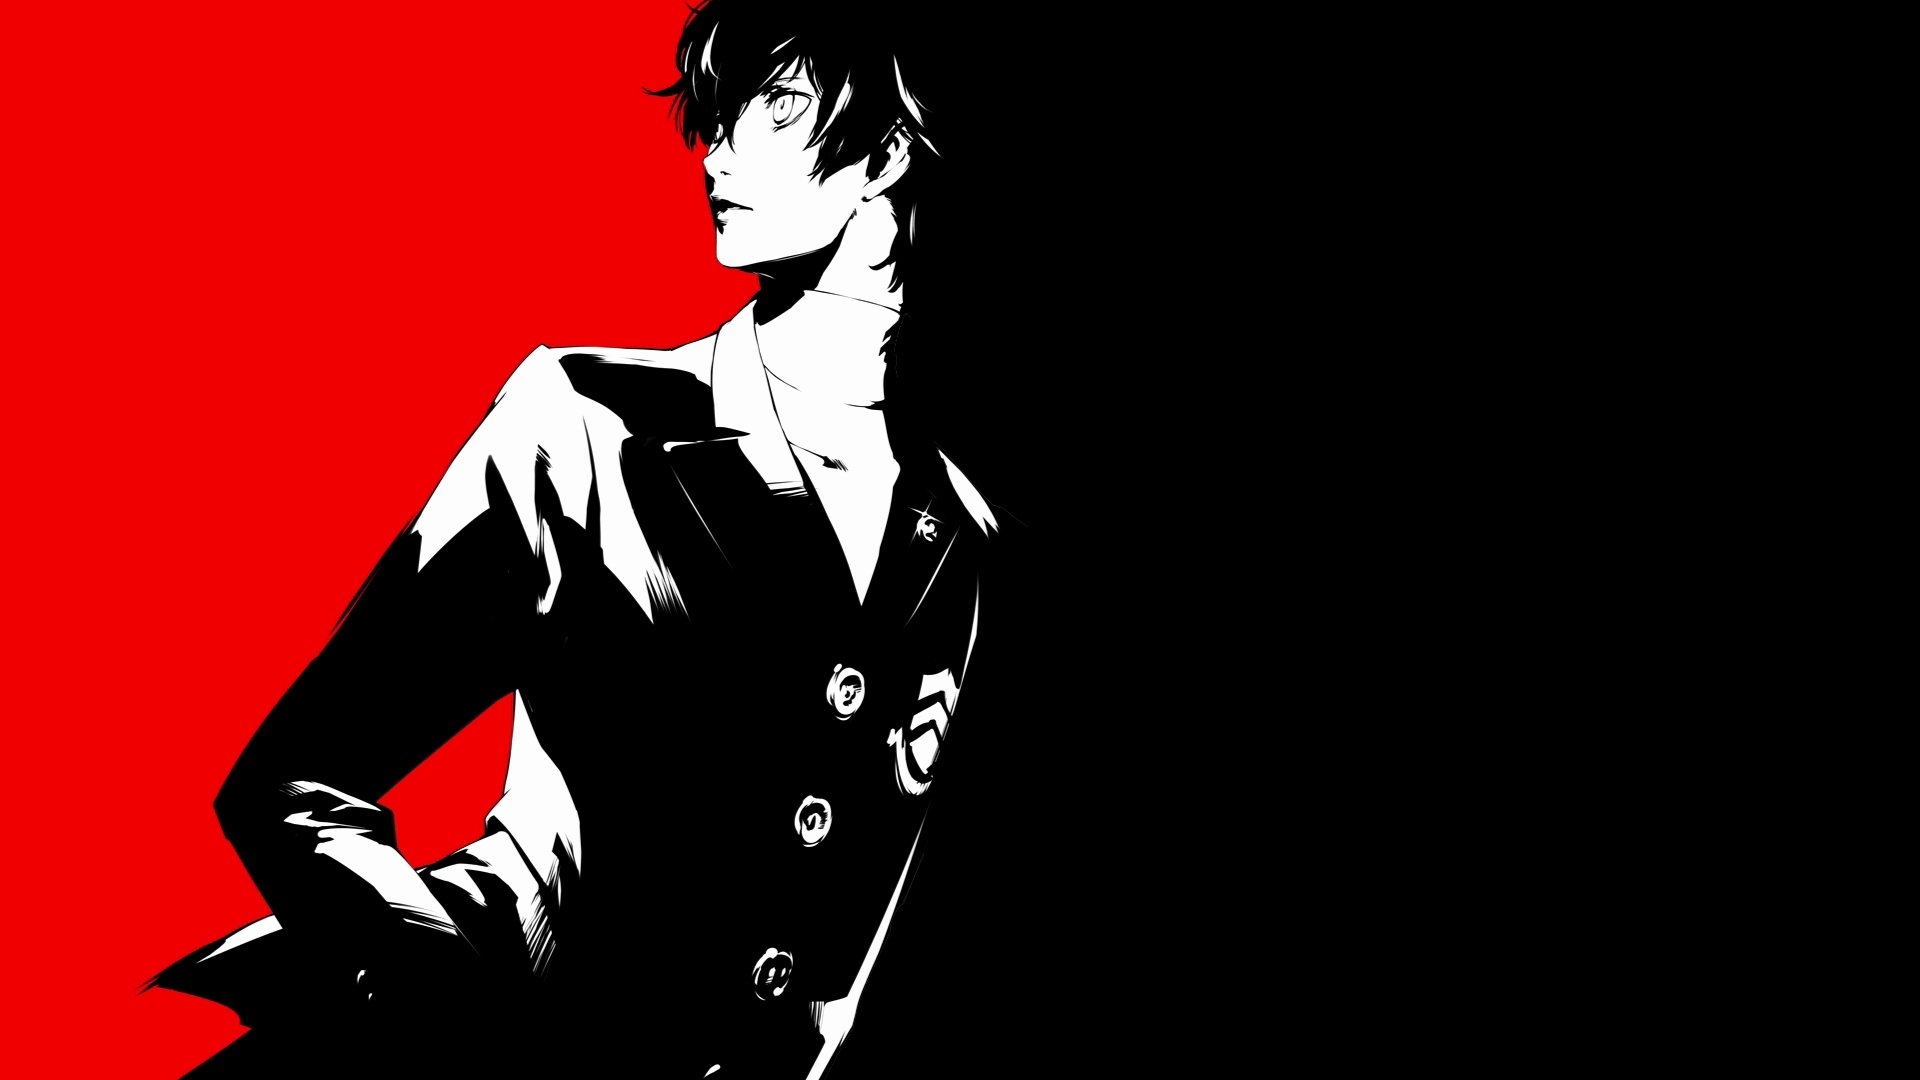 Persona 5 Royal Wallpaper For Pc